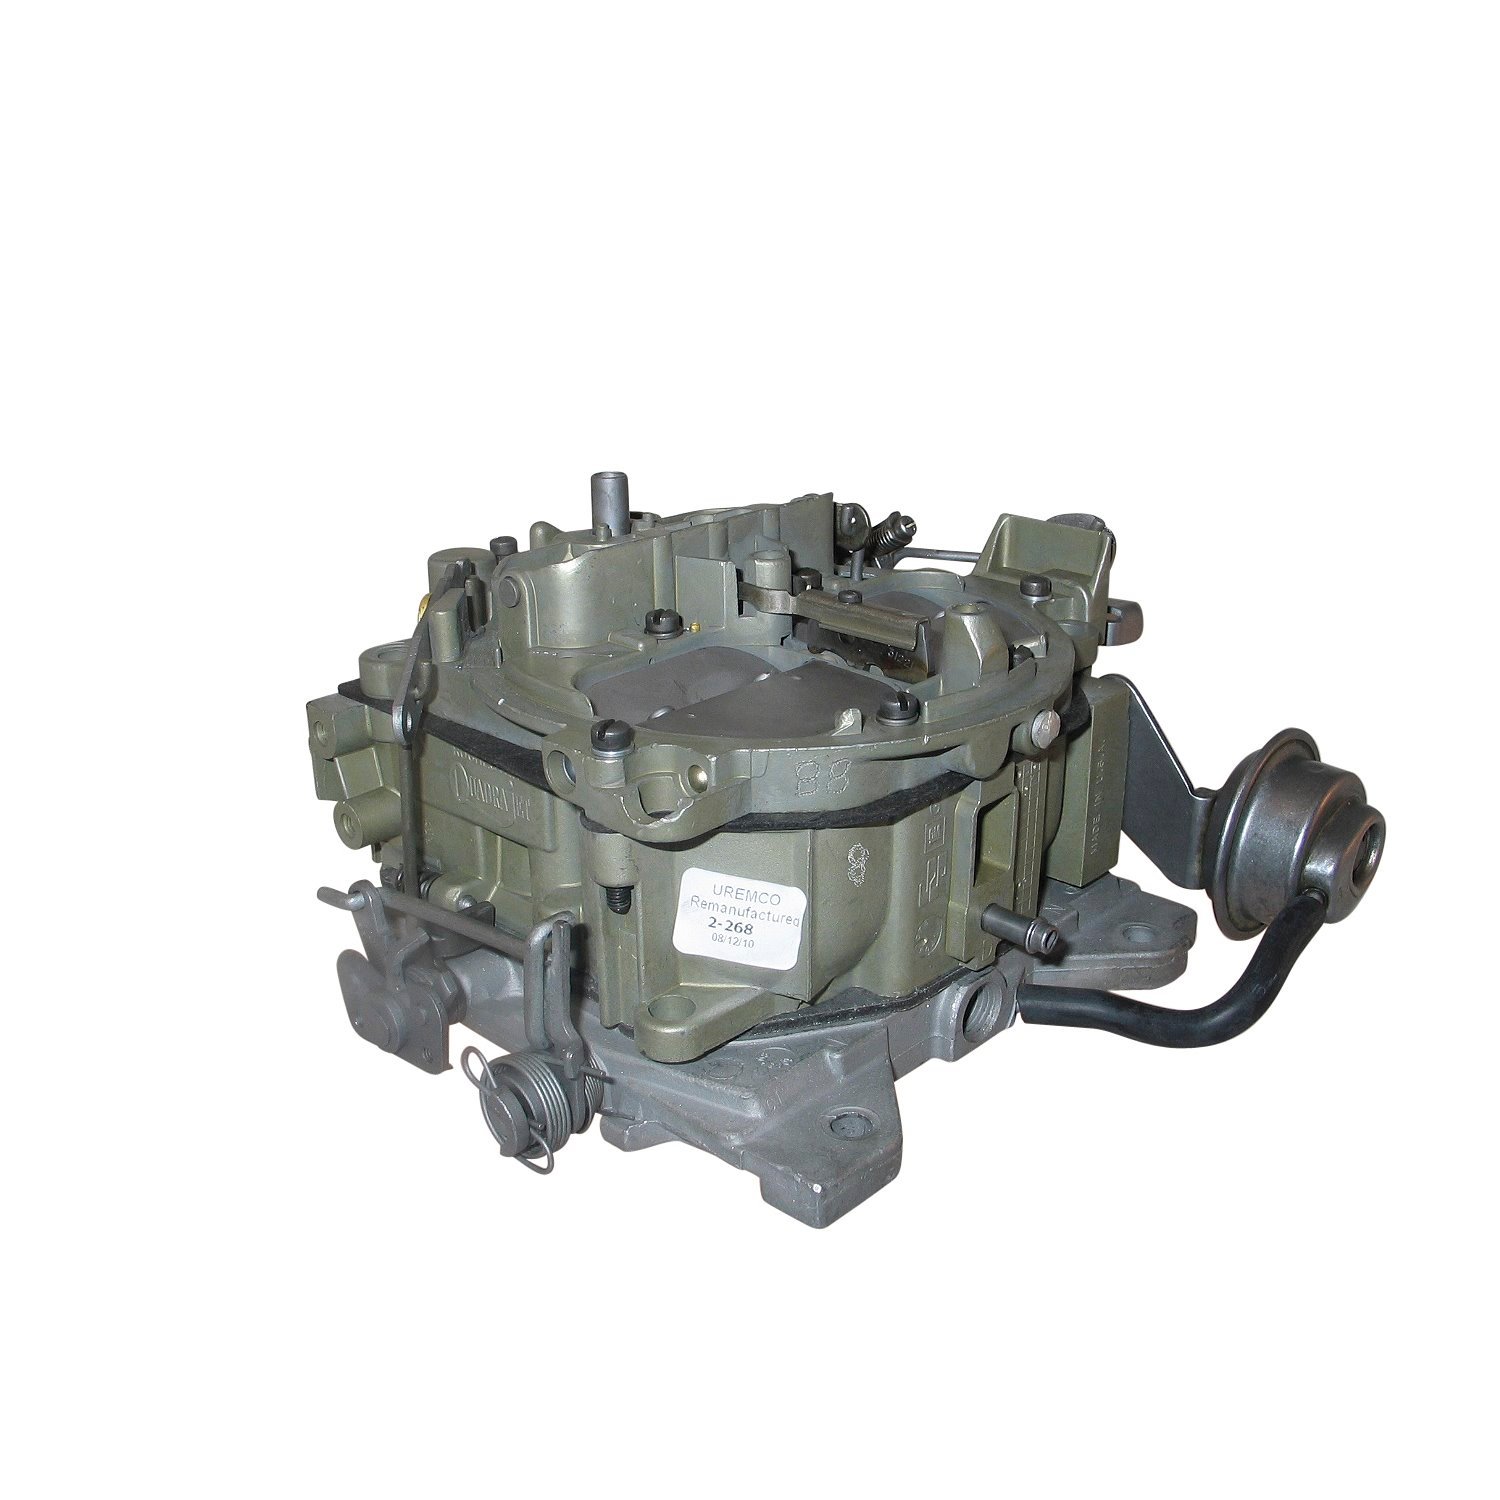 2-268 Rochester Remanufactured Carburetor, M4ME-Style